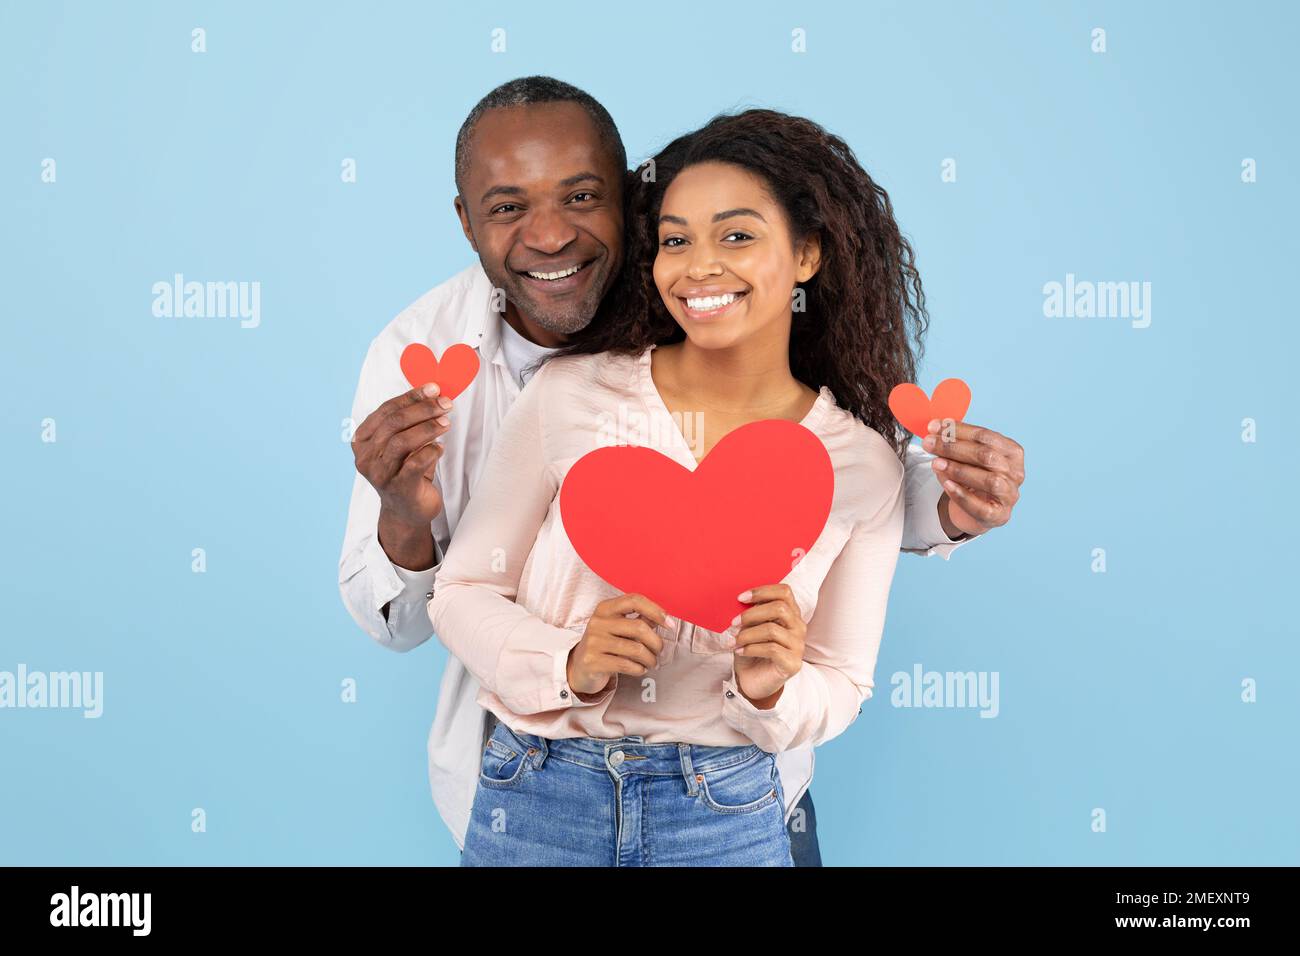 Love is in the air. Portrait of romantic black couple with red paper hearts in hands posing over blue background Stock Photo